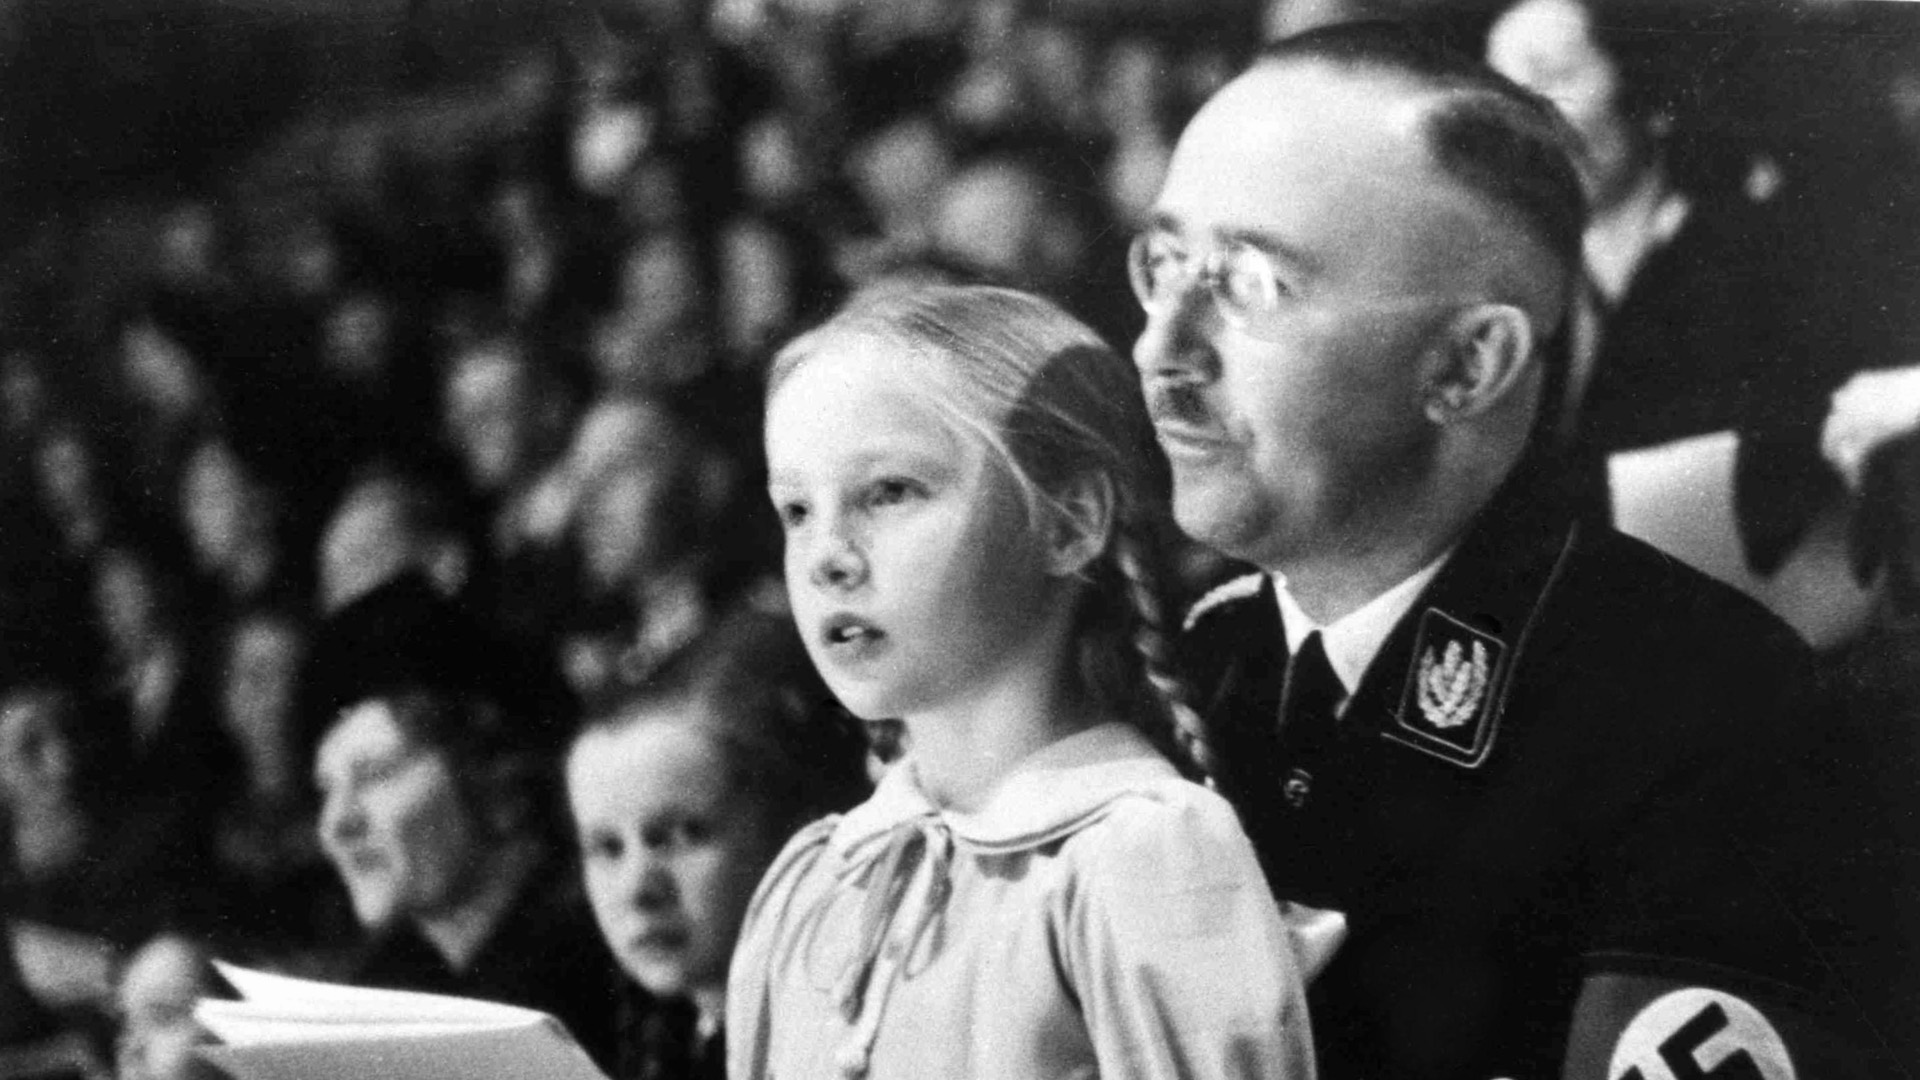 Gudrun Himmler with her father Heinrich at a Nazi sports festival, 1938.